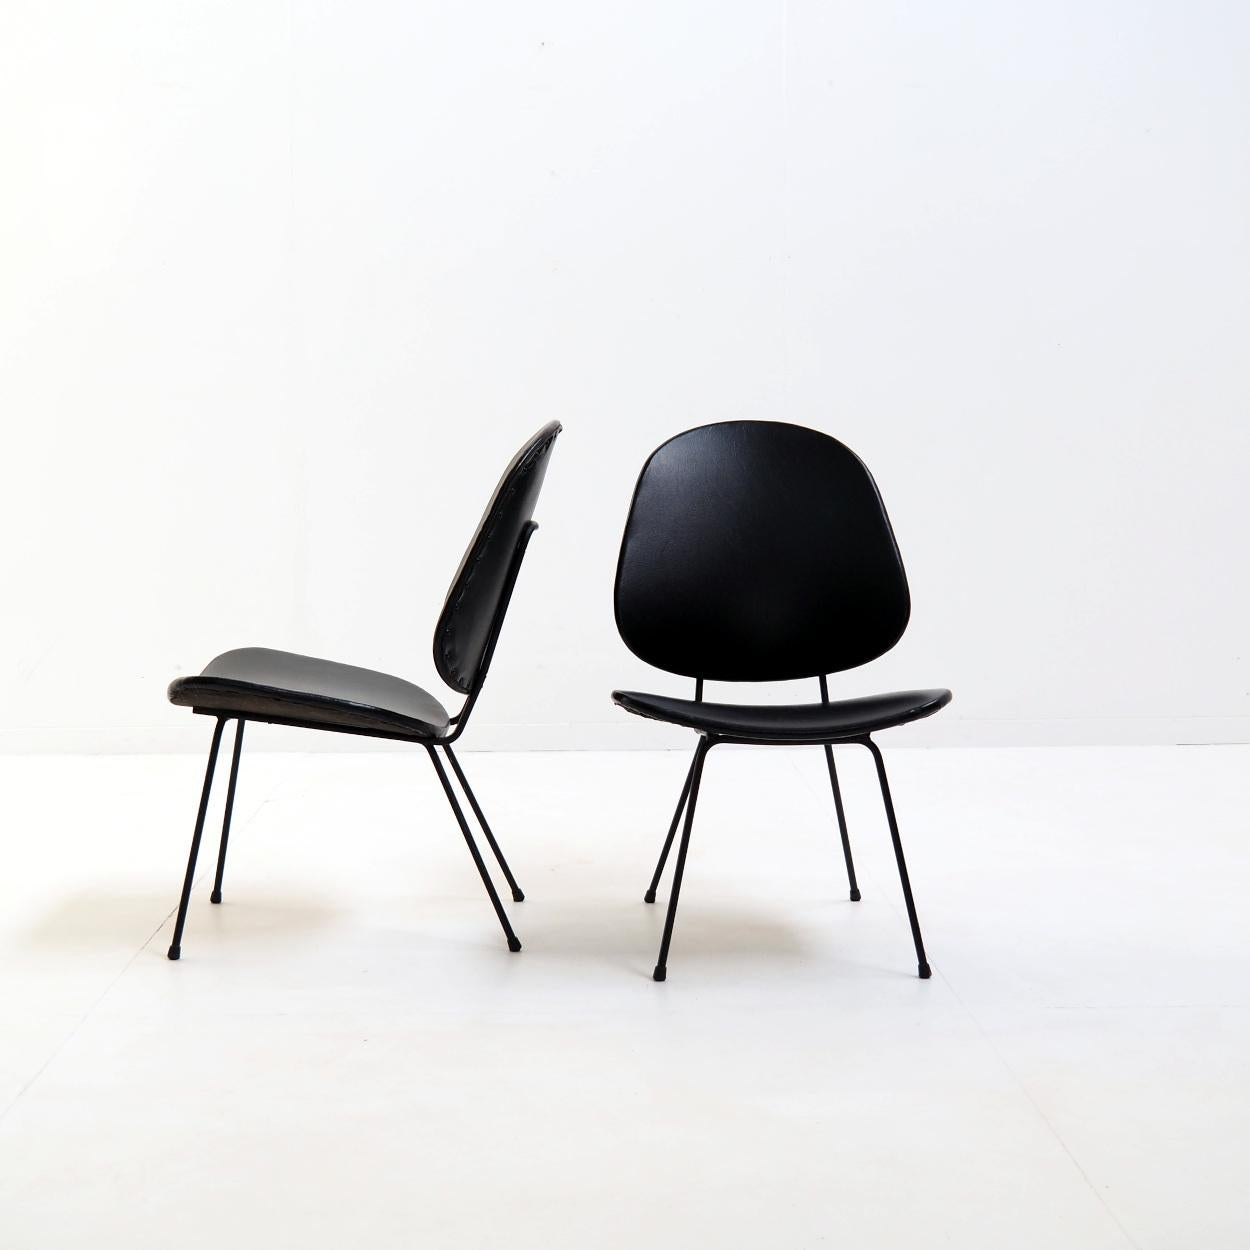 Two Chairs Designed by W.H.Gispen for the Dutch Company Kembo For Sale 1